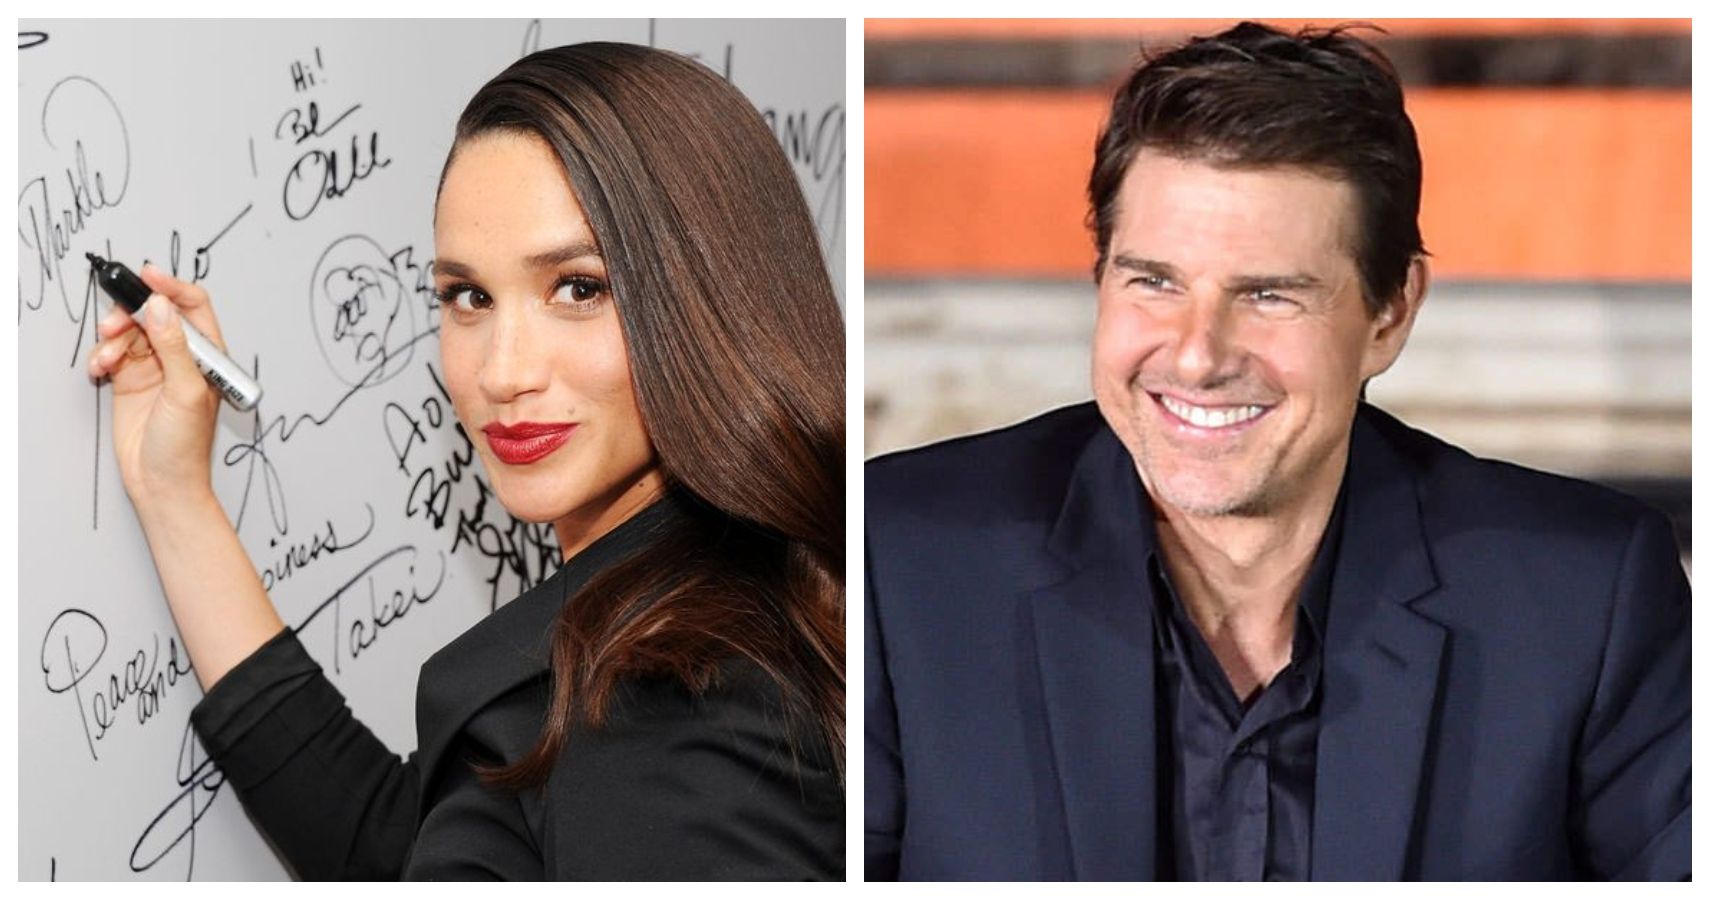 mEGHAN maRKLE AND tOM cRUISE JOBS BEFORE FAME